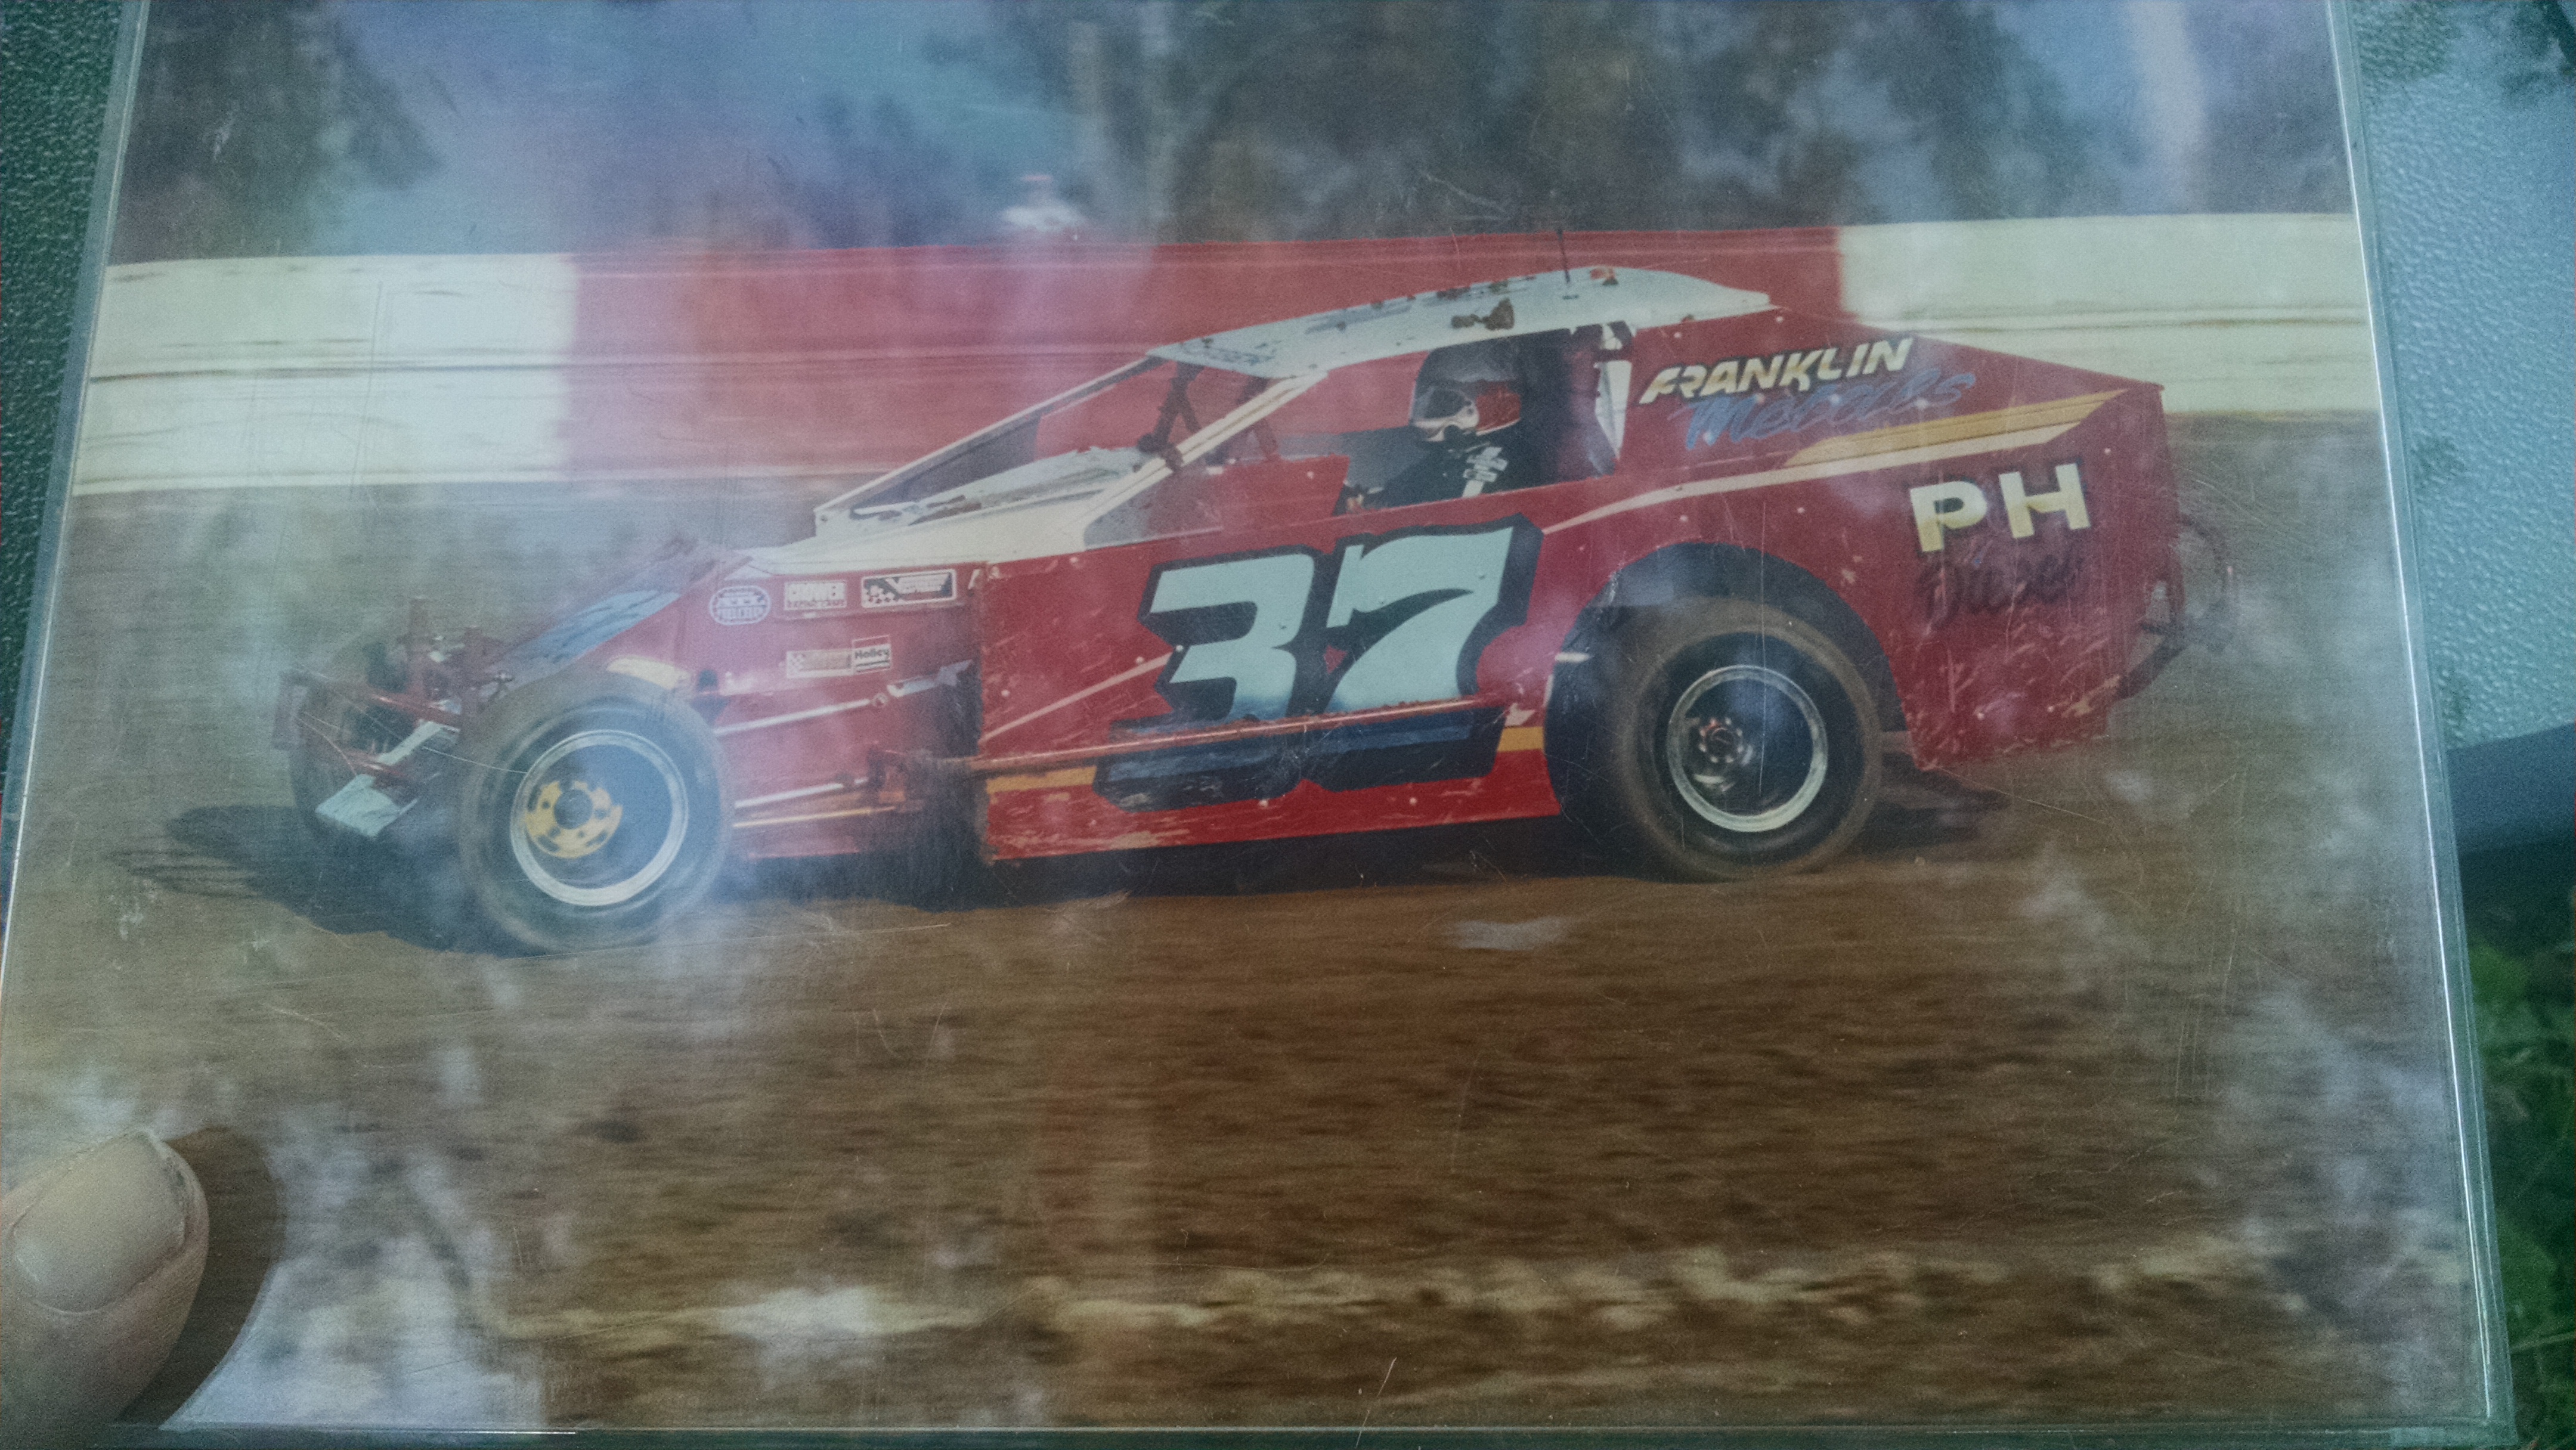 This is a picture of my dad's race car. It is a dirt track race car and number 37.